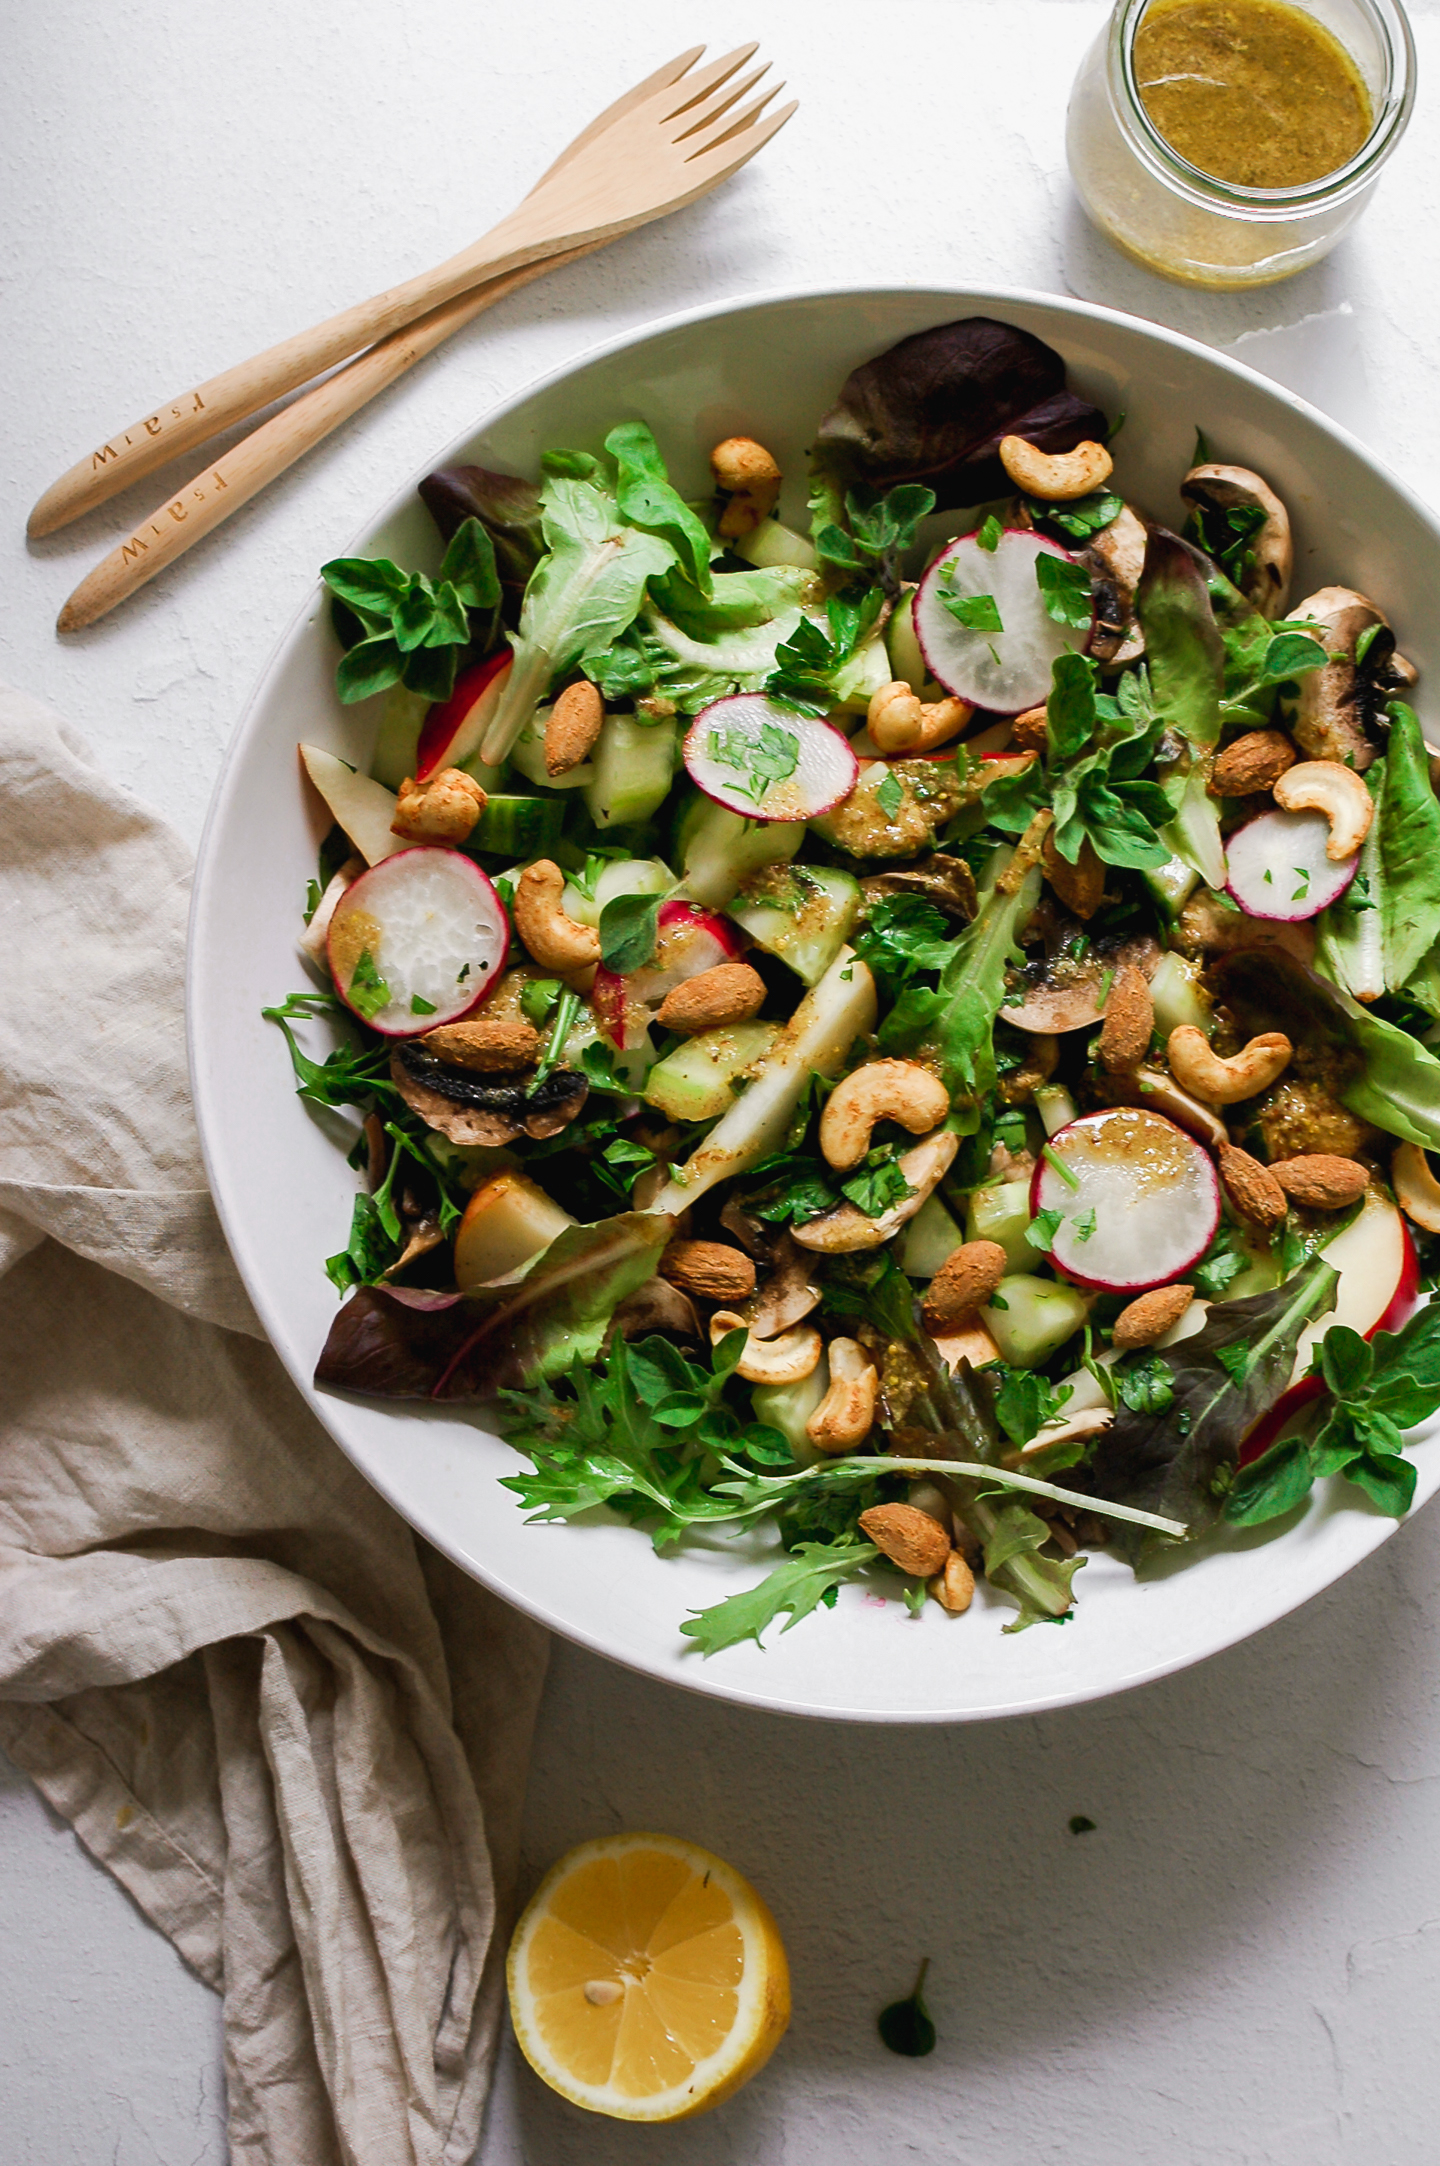 https://roottoskykitchen.com/wp-content/uploads/2021/05/Spring-Cleanse-Salad-with-Spiced-Activated-Nuts-and-Mustard-Flax-Seed-Dressing-1-roottoskykitchen.com_.jpg